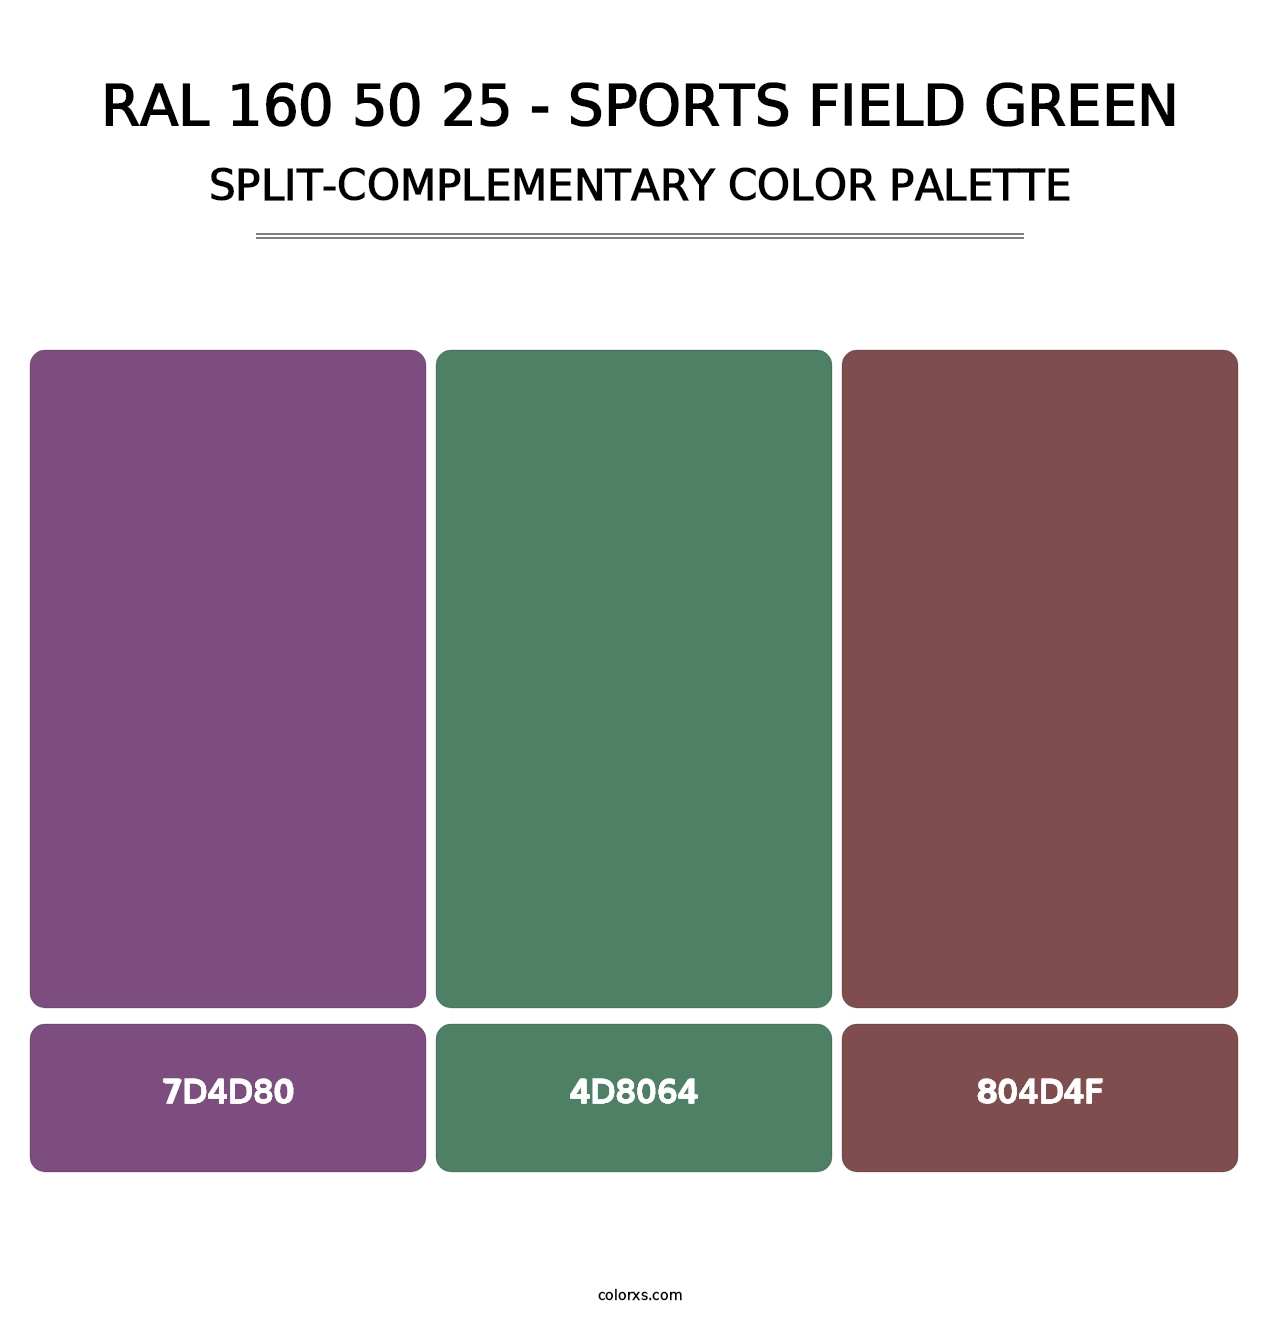 RAL 160 50 25 - Sports Field Green - Split-Complementary Color Palette